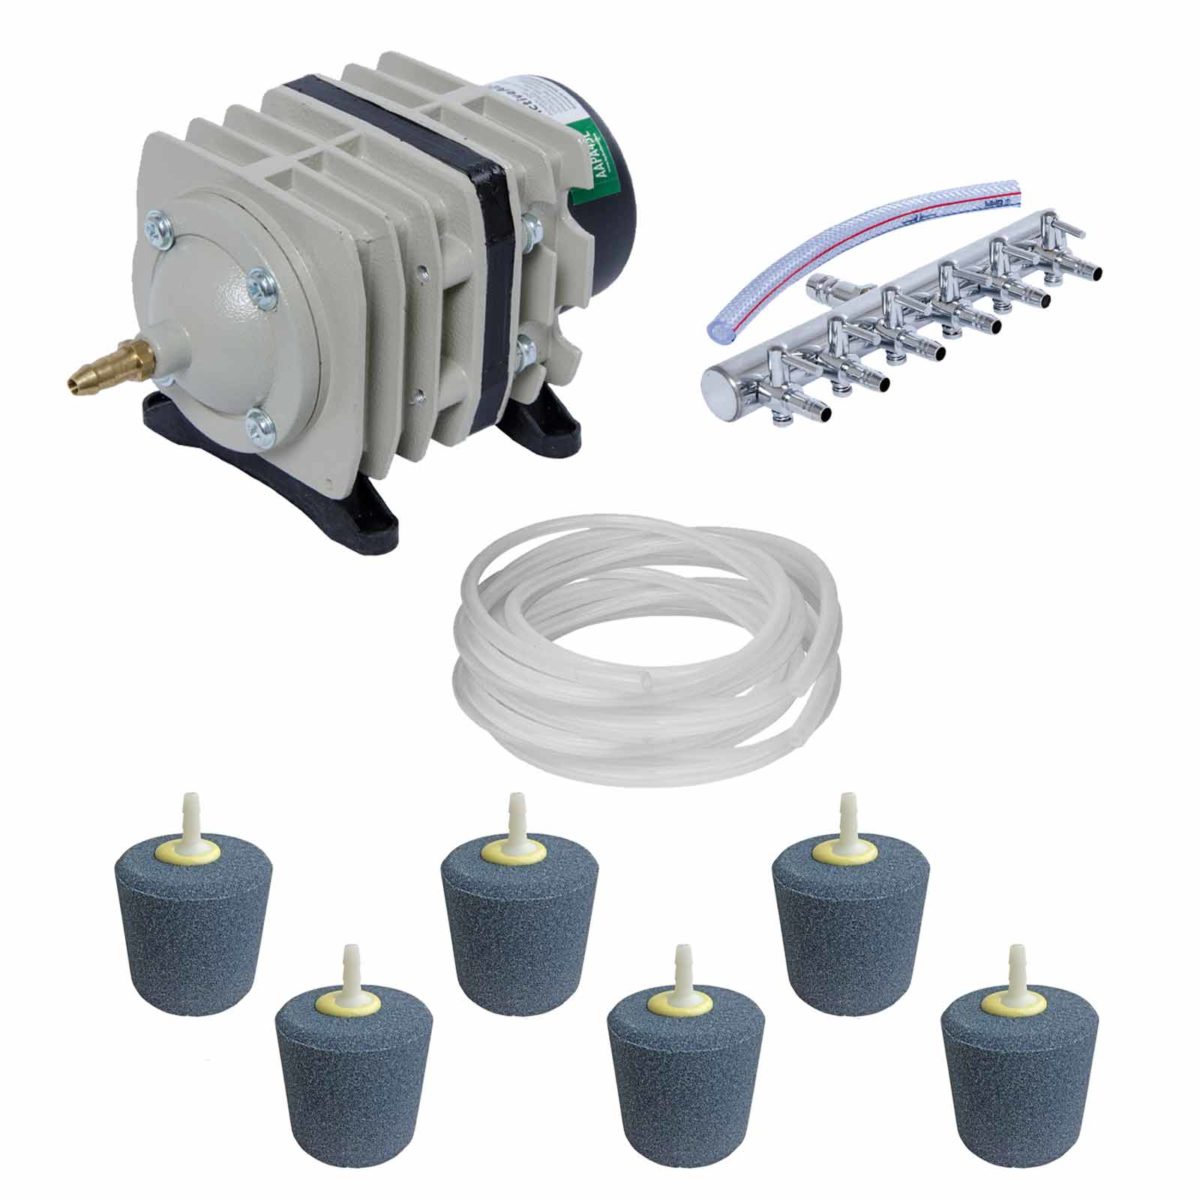 AquaAeration Kit with 6 Outlet Pump